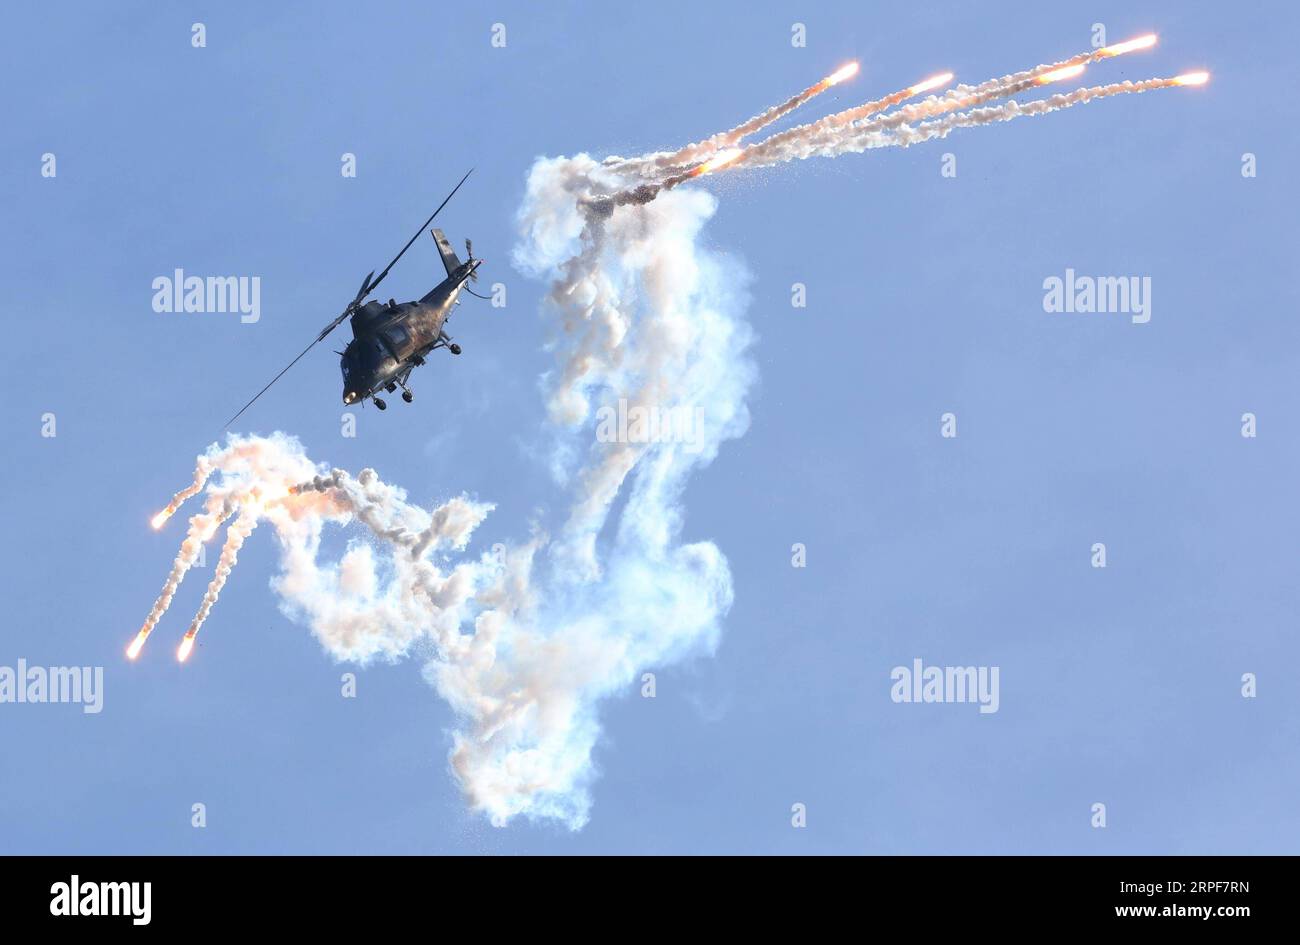 (190916) -- HECHTEL, Sept. 16, 2019 -- A helicopter Agusta A-109 of the Belgian Air Force performs at the International Sanicole Airshow in Hechtel, Belgium, Sept. 15, 2019. ) BELGIUM-HECHTEL-SANICOLE AIRSHOW WangxXiaojun PUBLICATIONxNOTxINxCHN Stock Photo